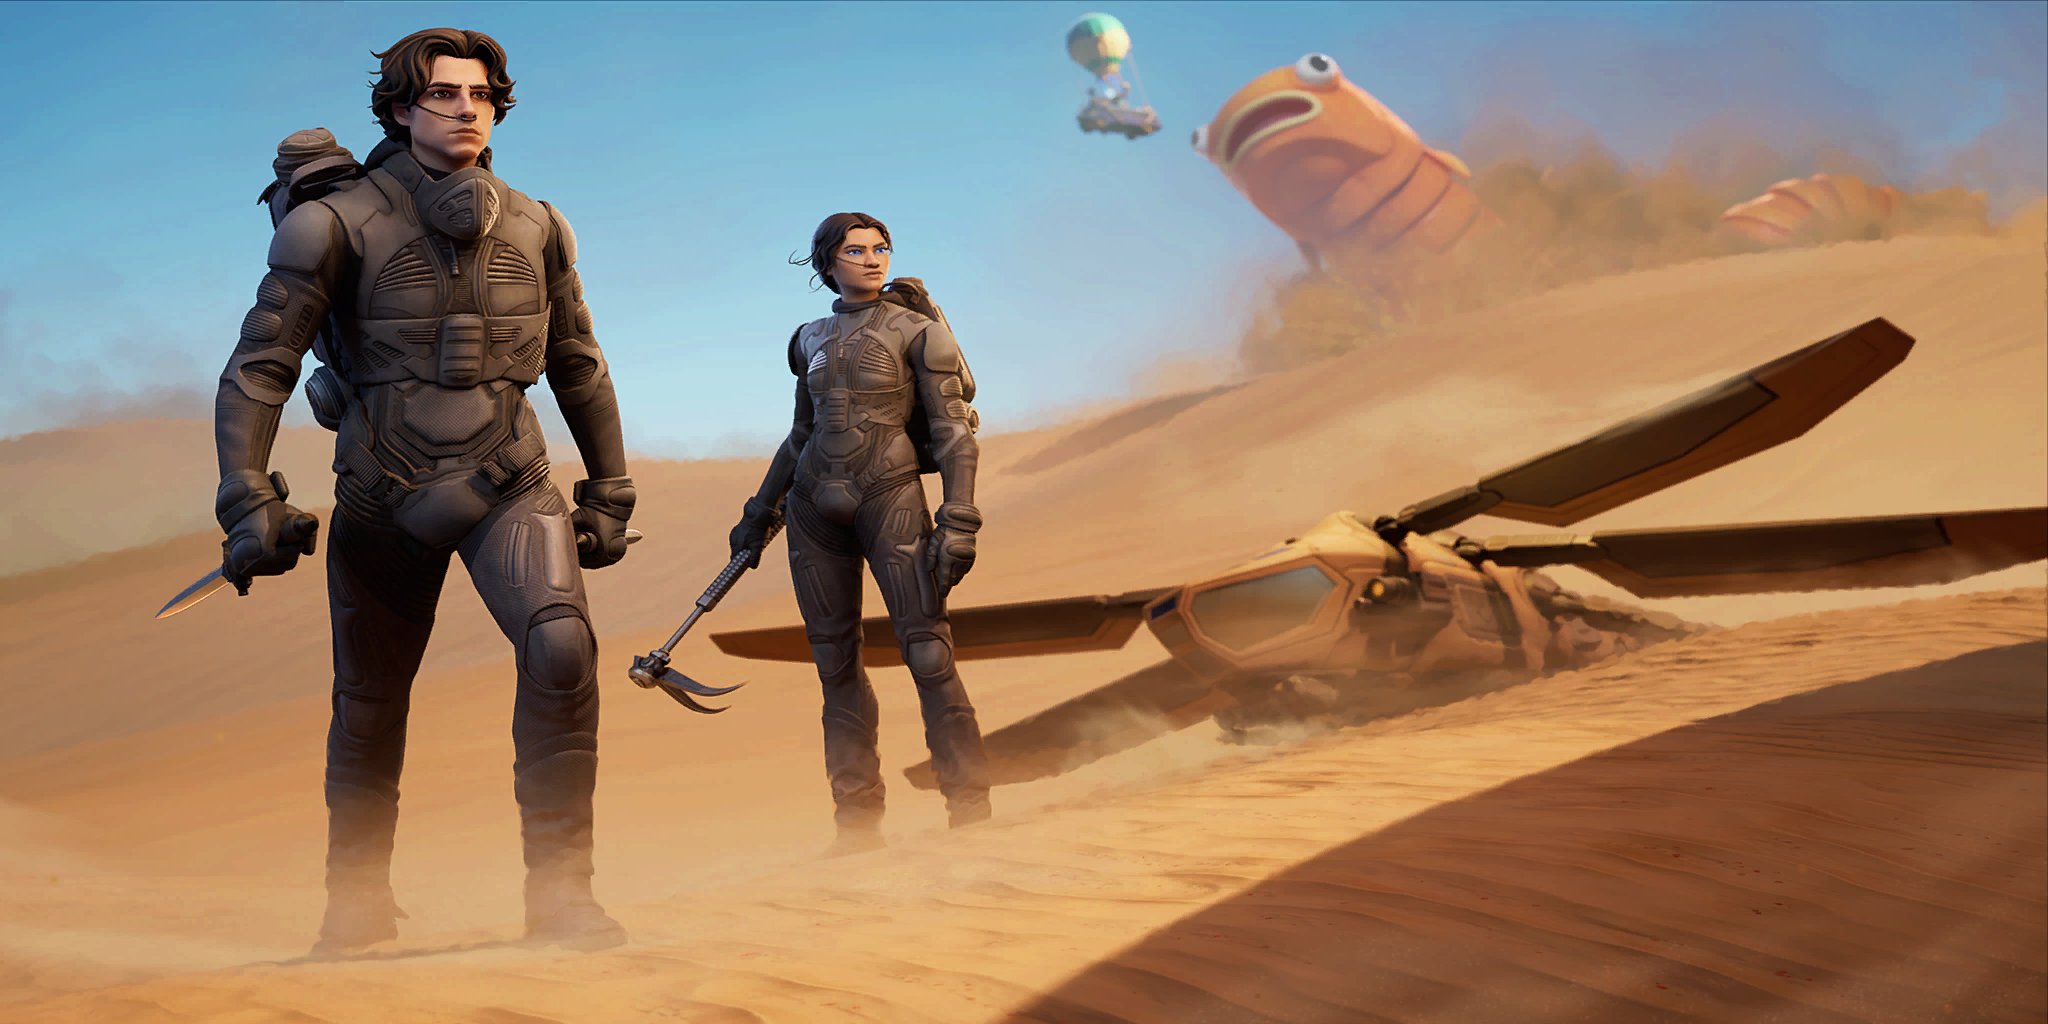 Characters from the movie Dune are coming to Fortnite  